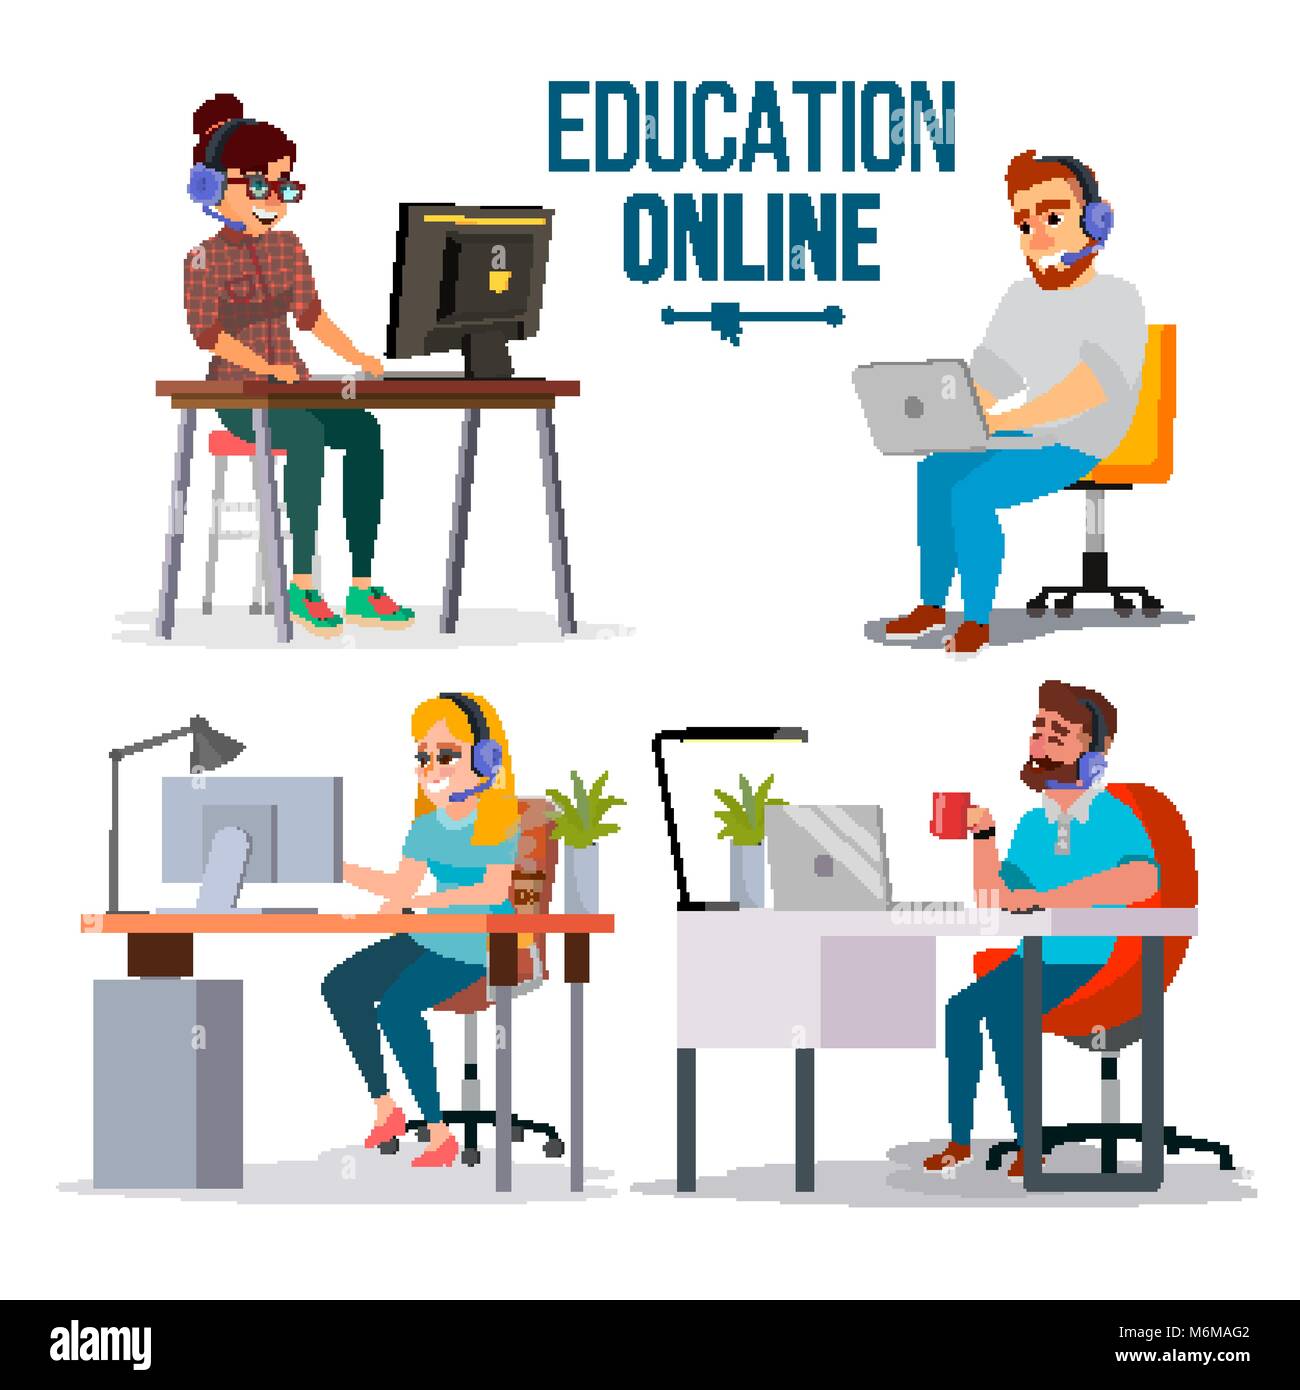 Education Online Concept Vector People Using Online Education